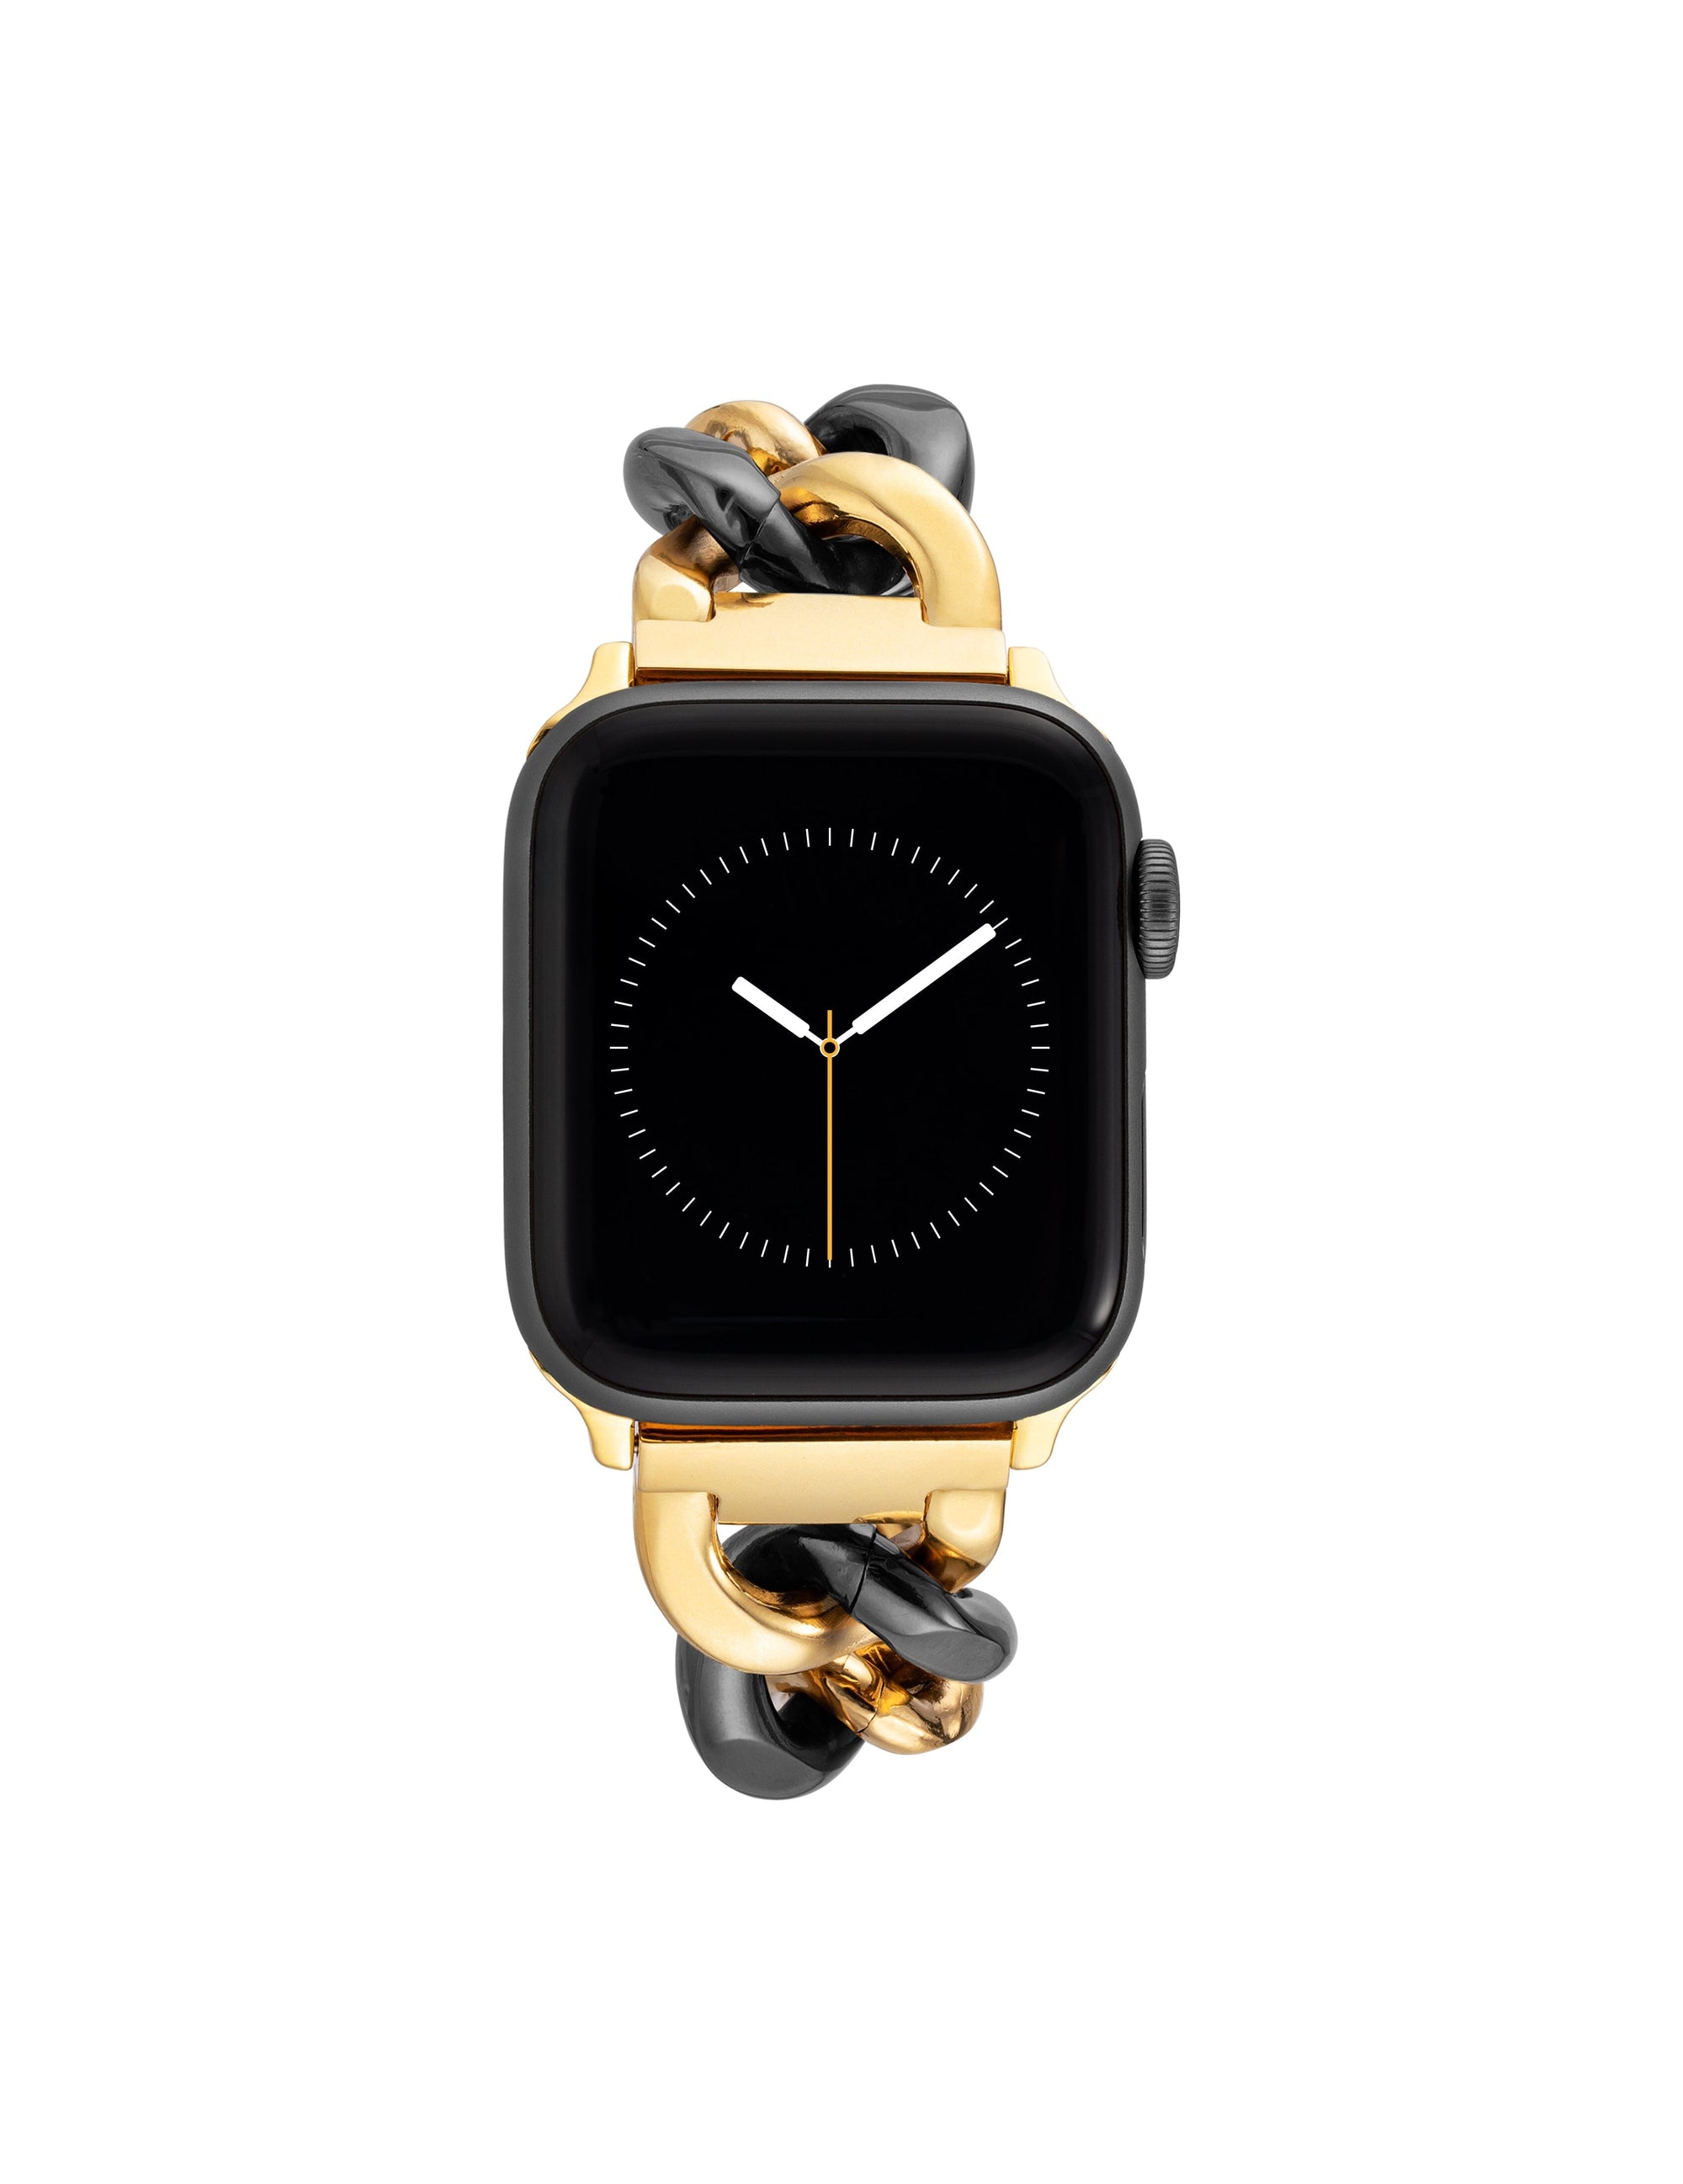 High End Fashion Look Gold and Black Apple Watch Band Chain 